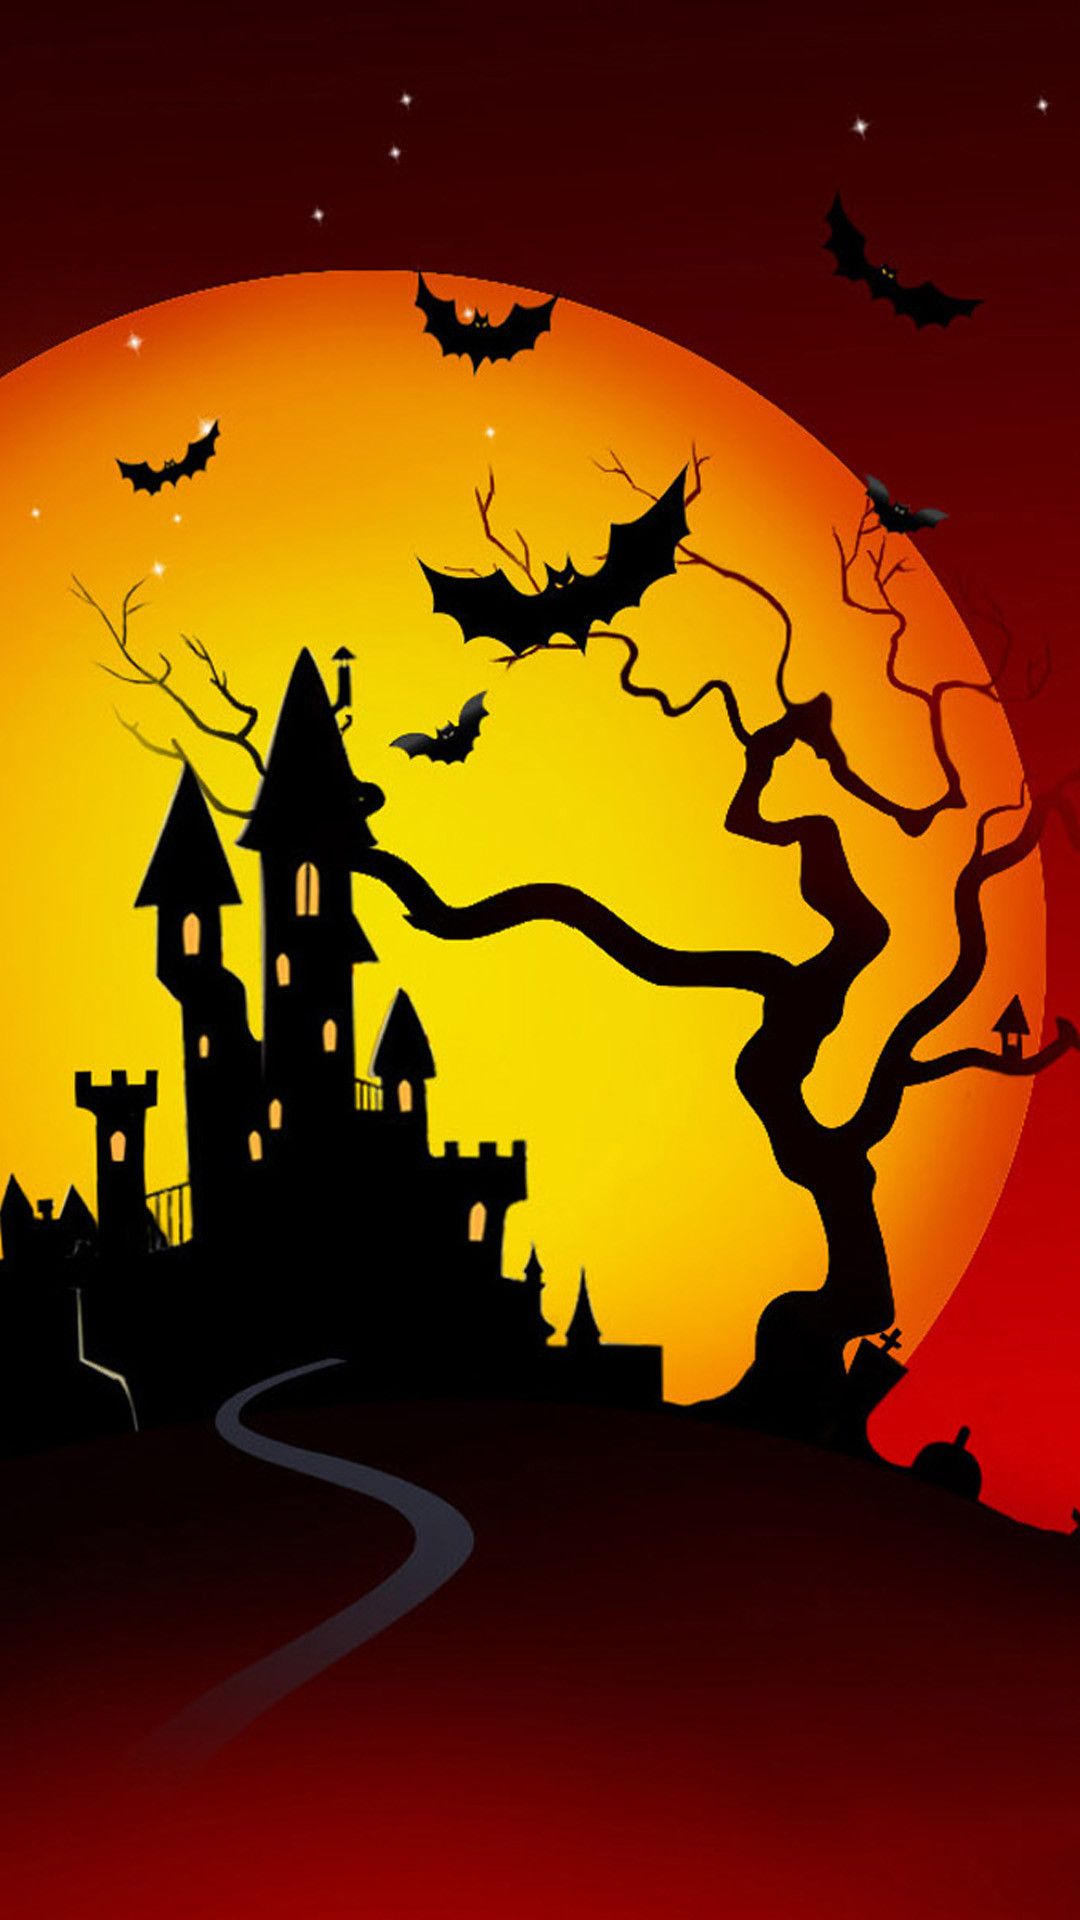 Free download Live Halloween Wallpaper for iPhone - [1080x1920] for your Desktop, Mobile & Tablet. Explore Halloween Wallpaper Image. Halloween Wallpaper Free, Halloween Wallpaper For Desktop, Free Halloween Wallpaper For Desktop